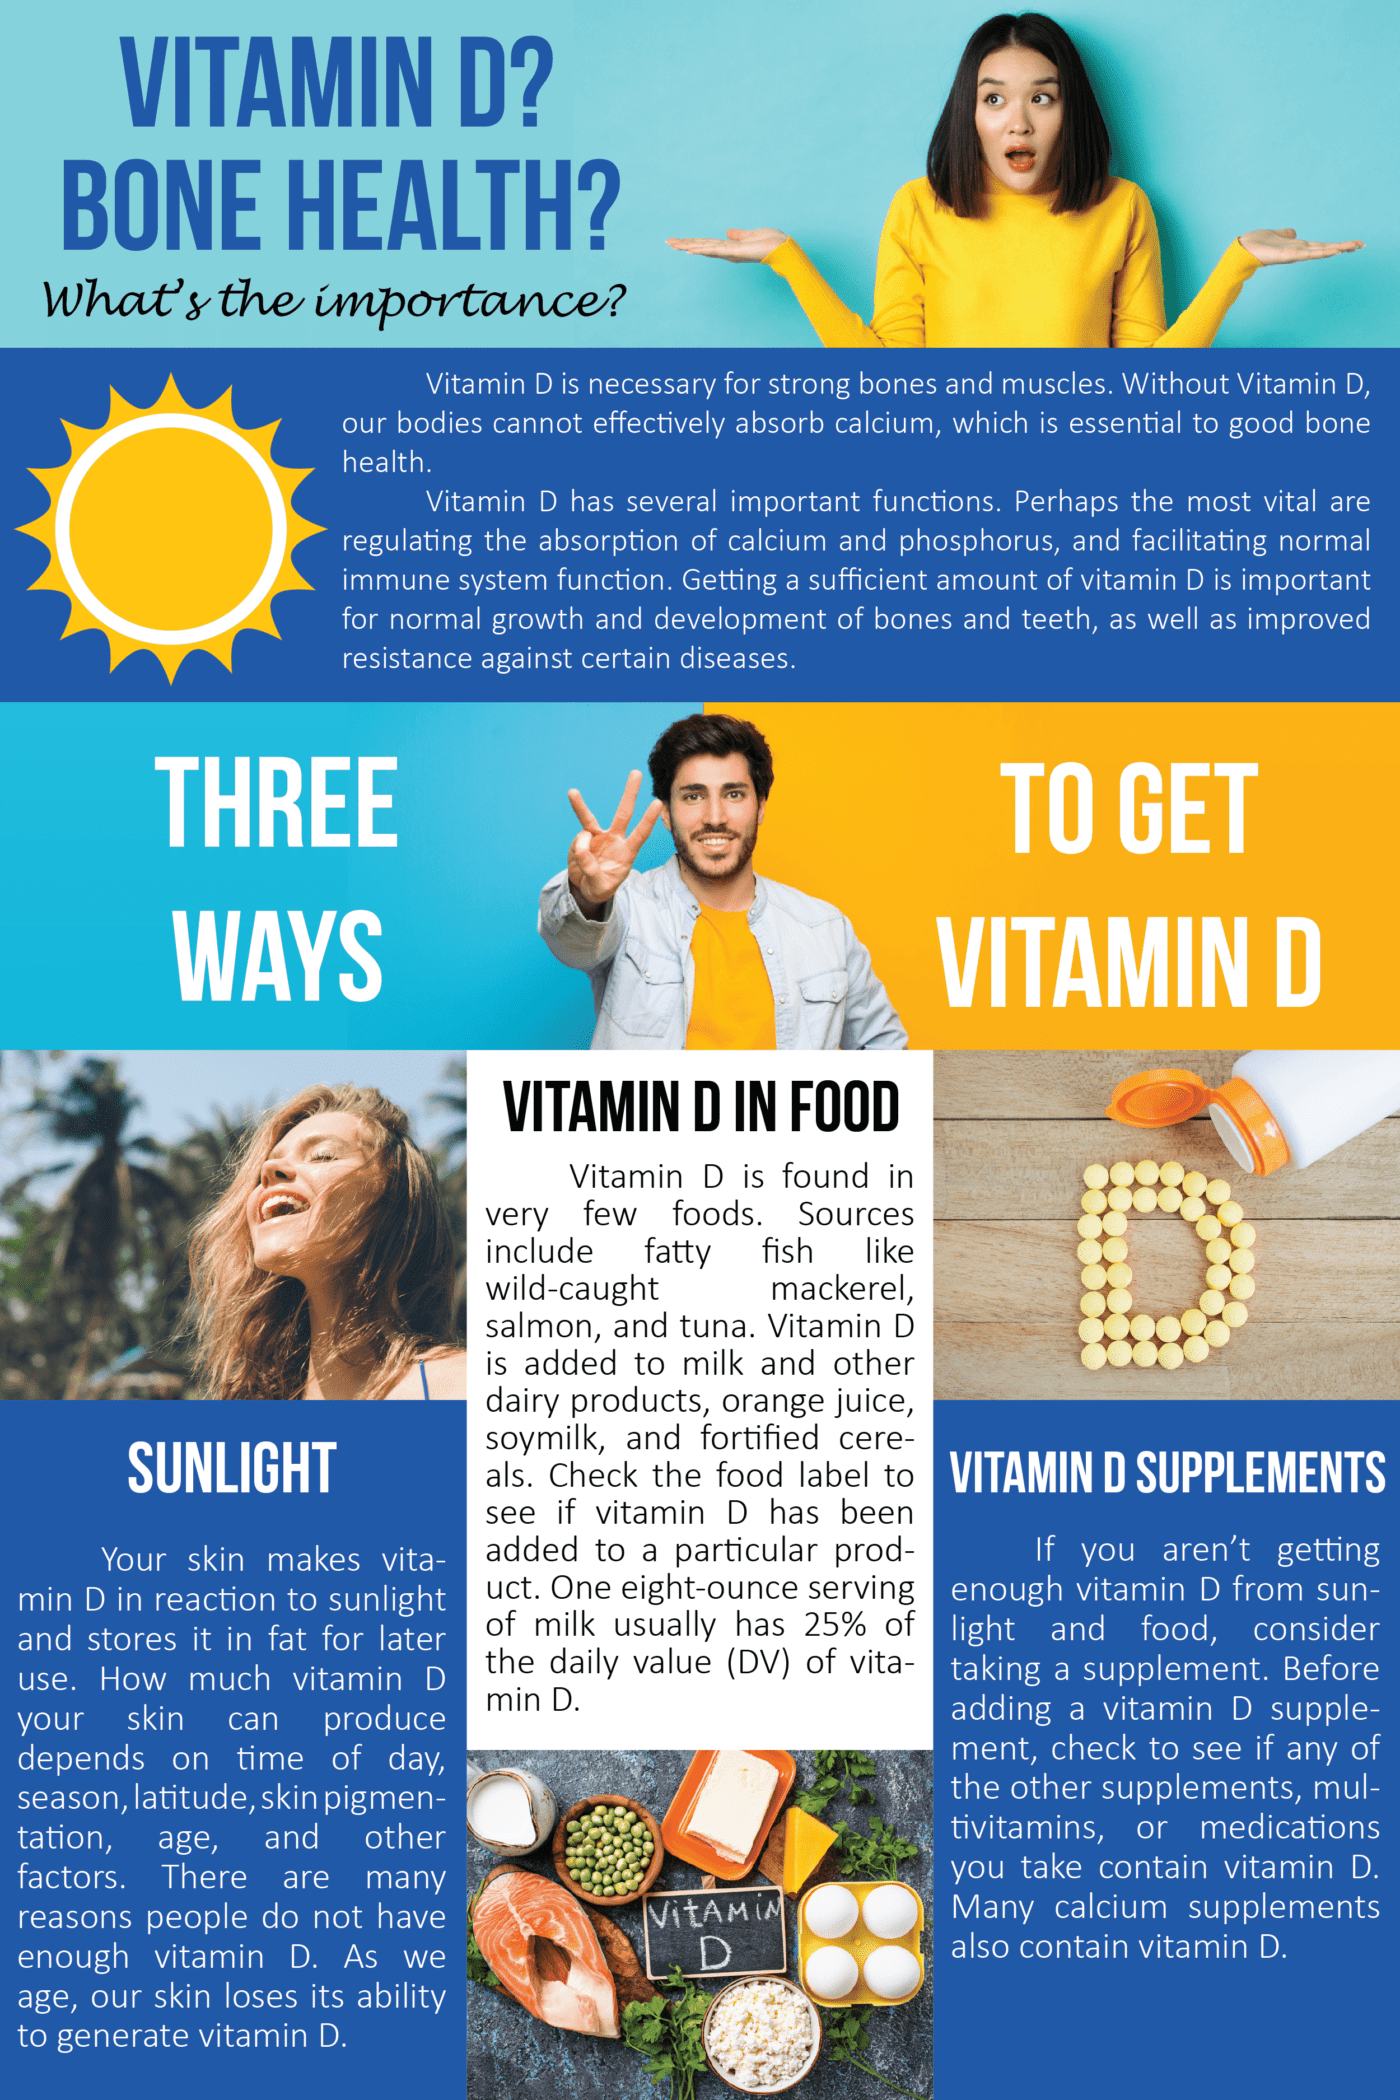 The Importance of Vitamin D to our Bone Health